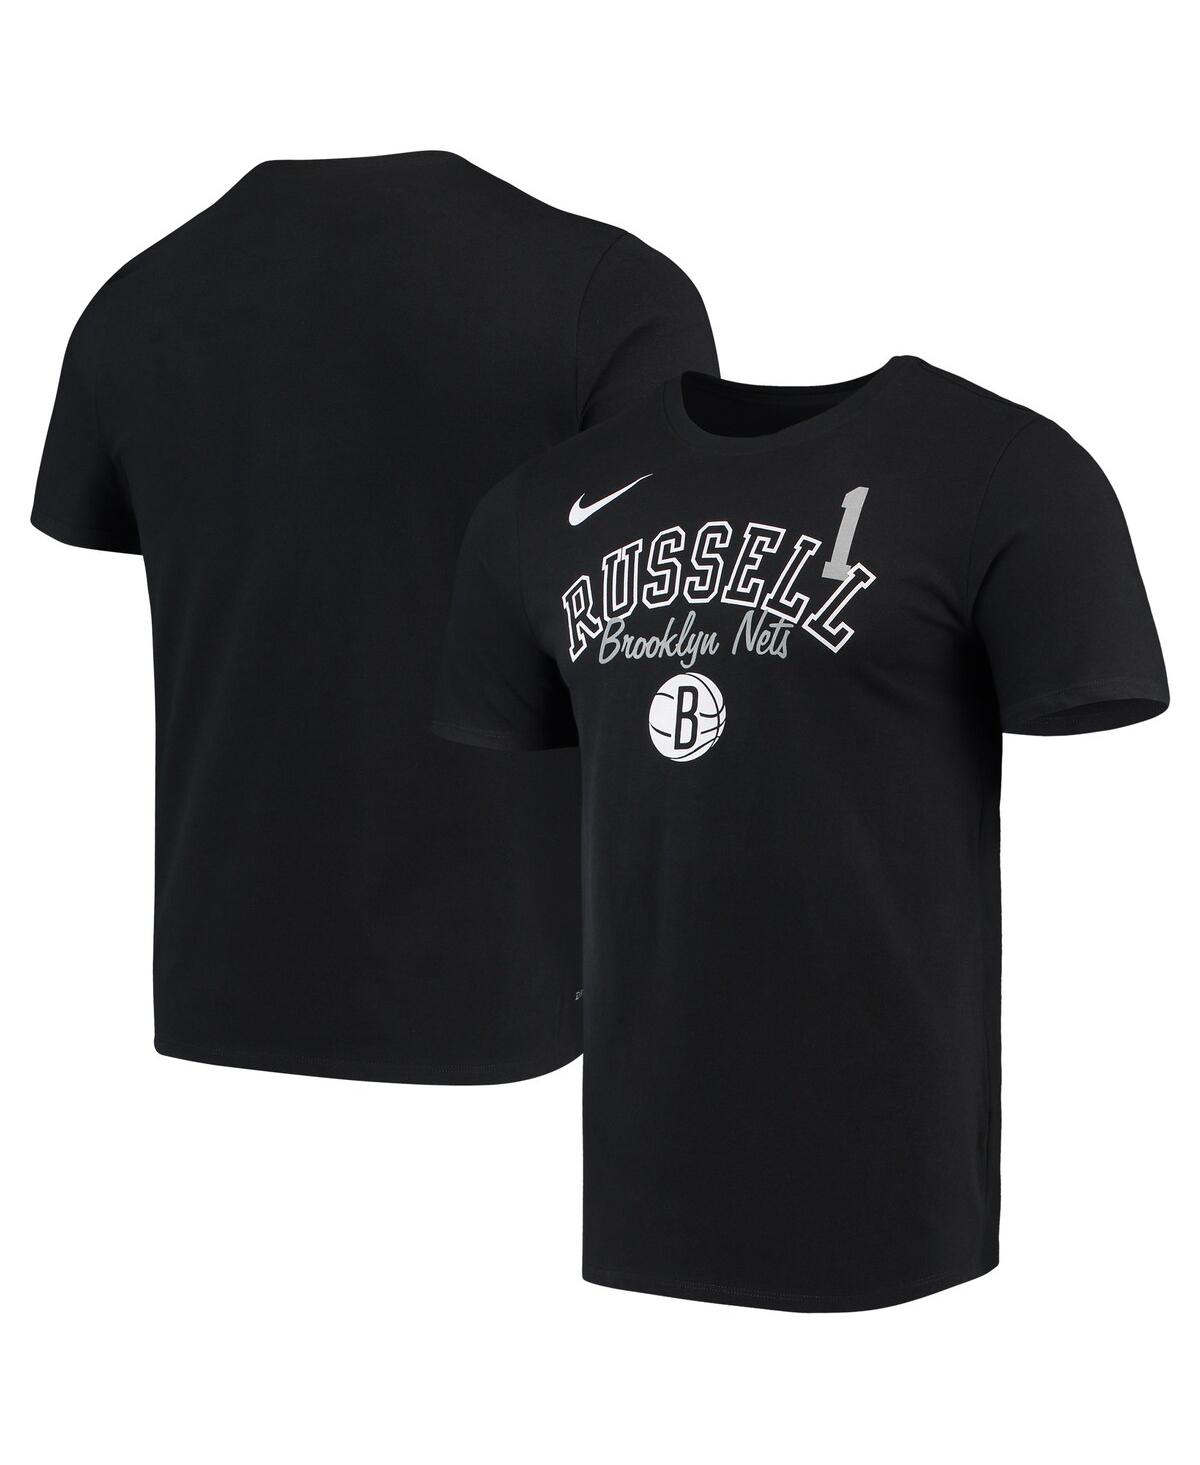 UPC 194305000046 product image for Men's Nike D'Angelo Russell Black Brooklyn Nets Player Performance T-shirt | upcitemdb.com